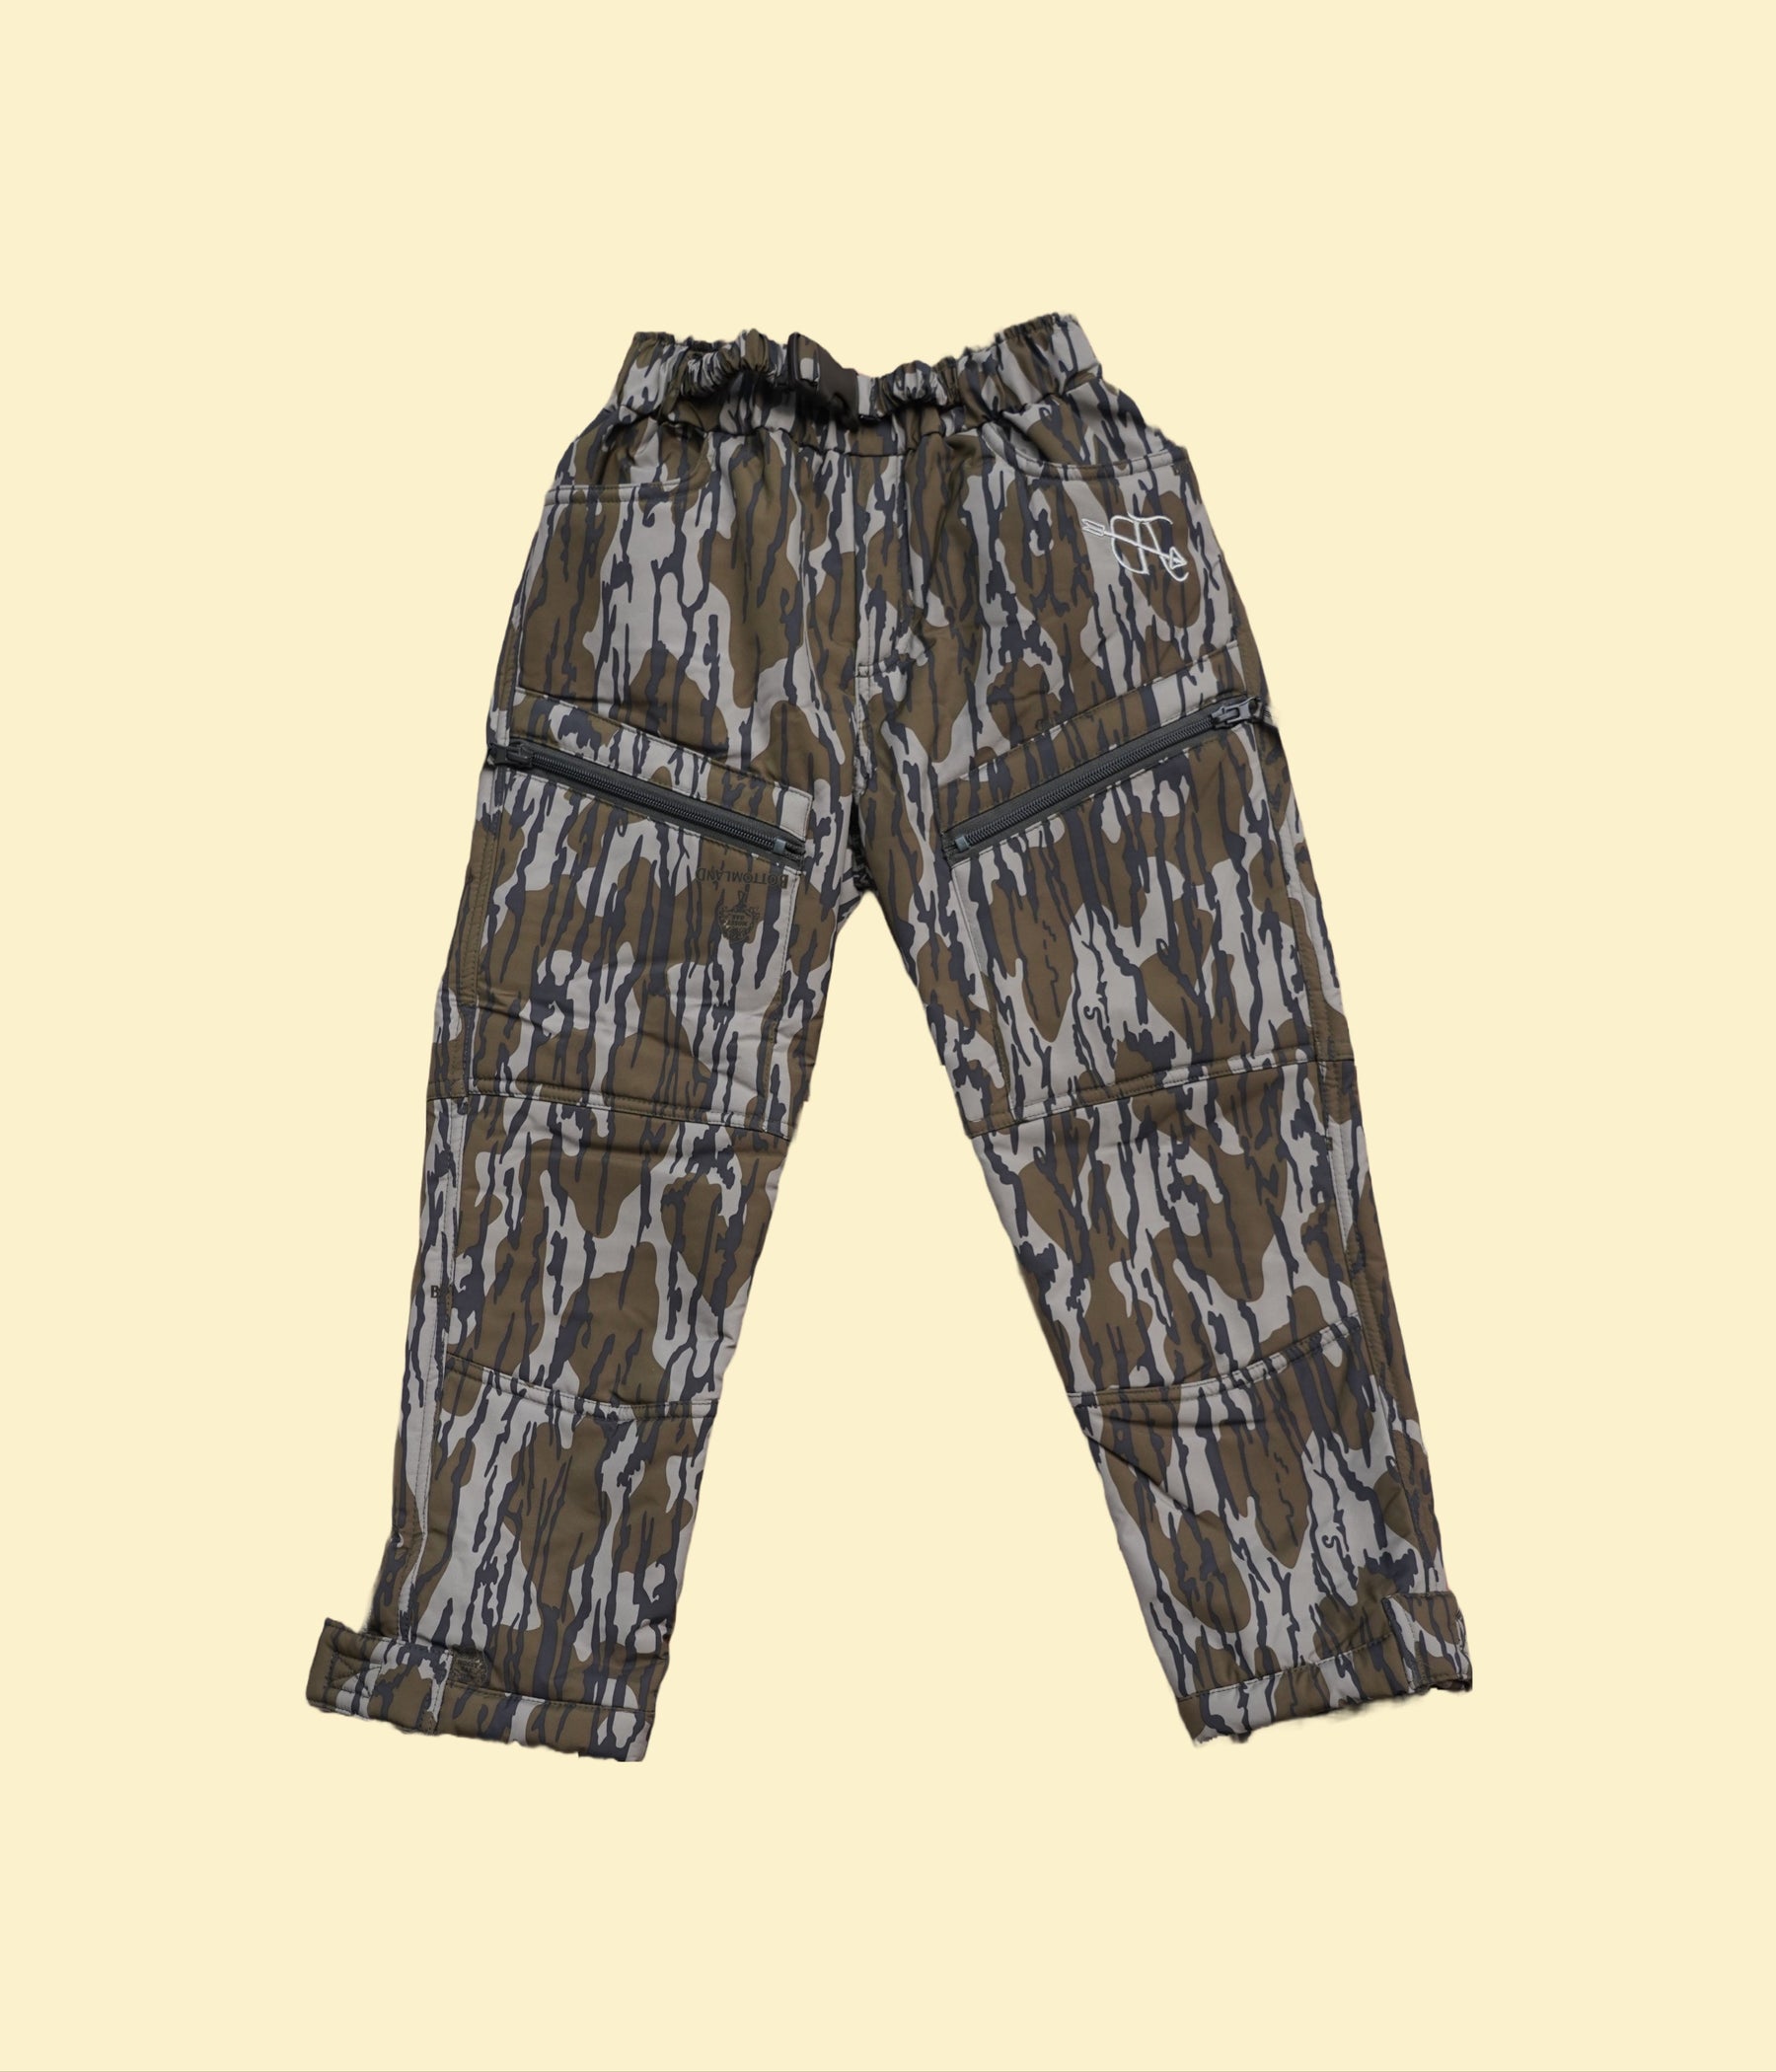 Medium Weight Hunting Pant by Bow and Arrow Outdoors - Sportsman Gear